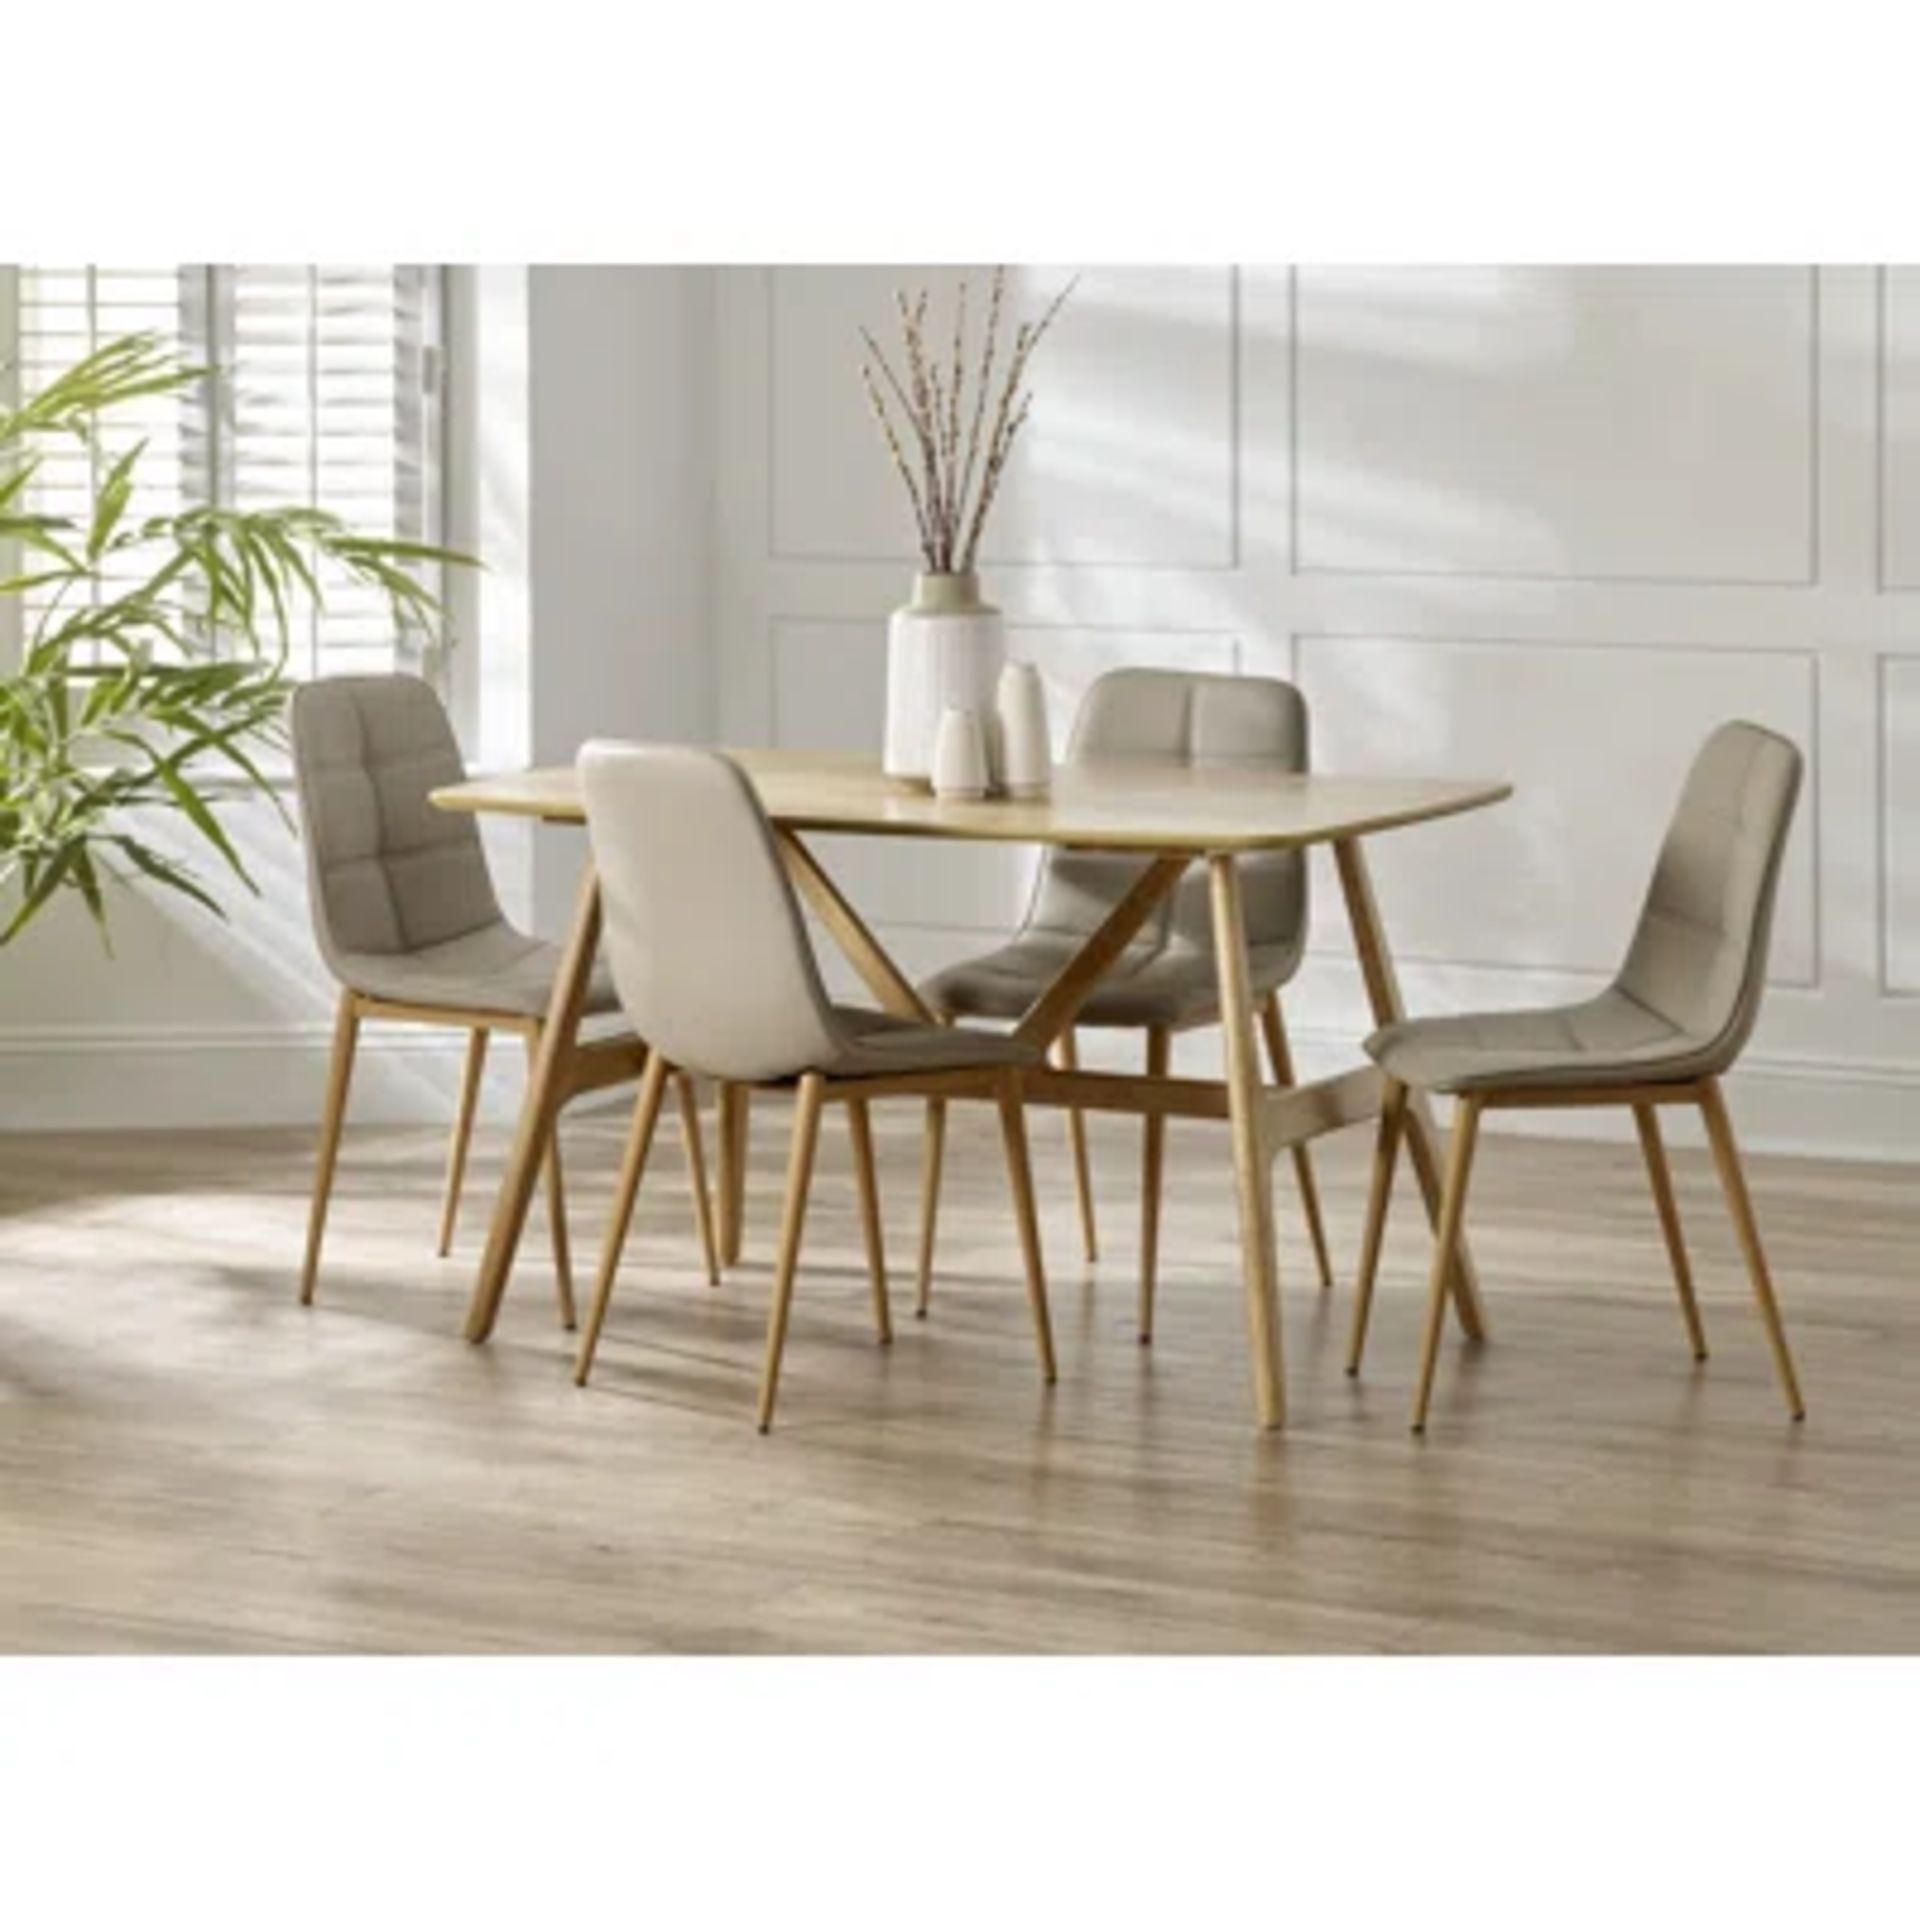 RRP £ 242.99 - Chantilly 75 Cm Dining Table Colour: Oak - Image 3 of 4